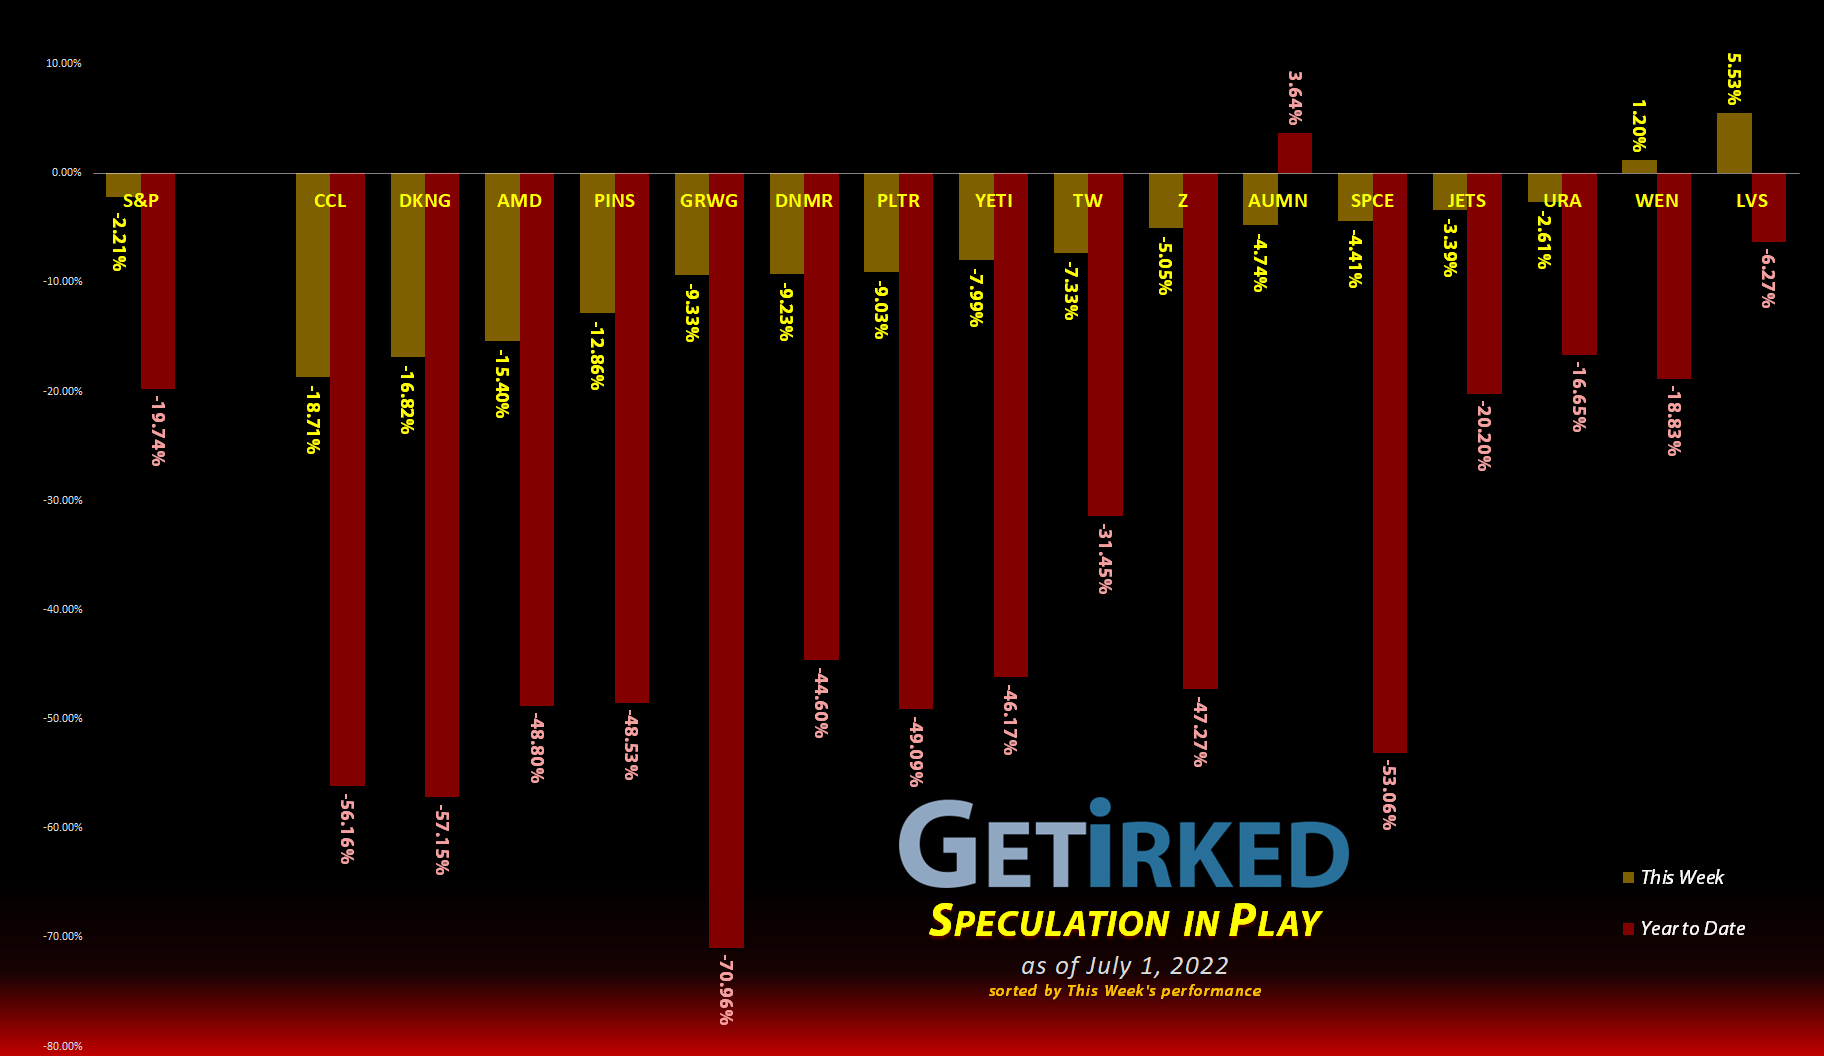 Get Irked's Speculation in Play - July 1, 2022